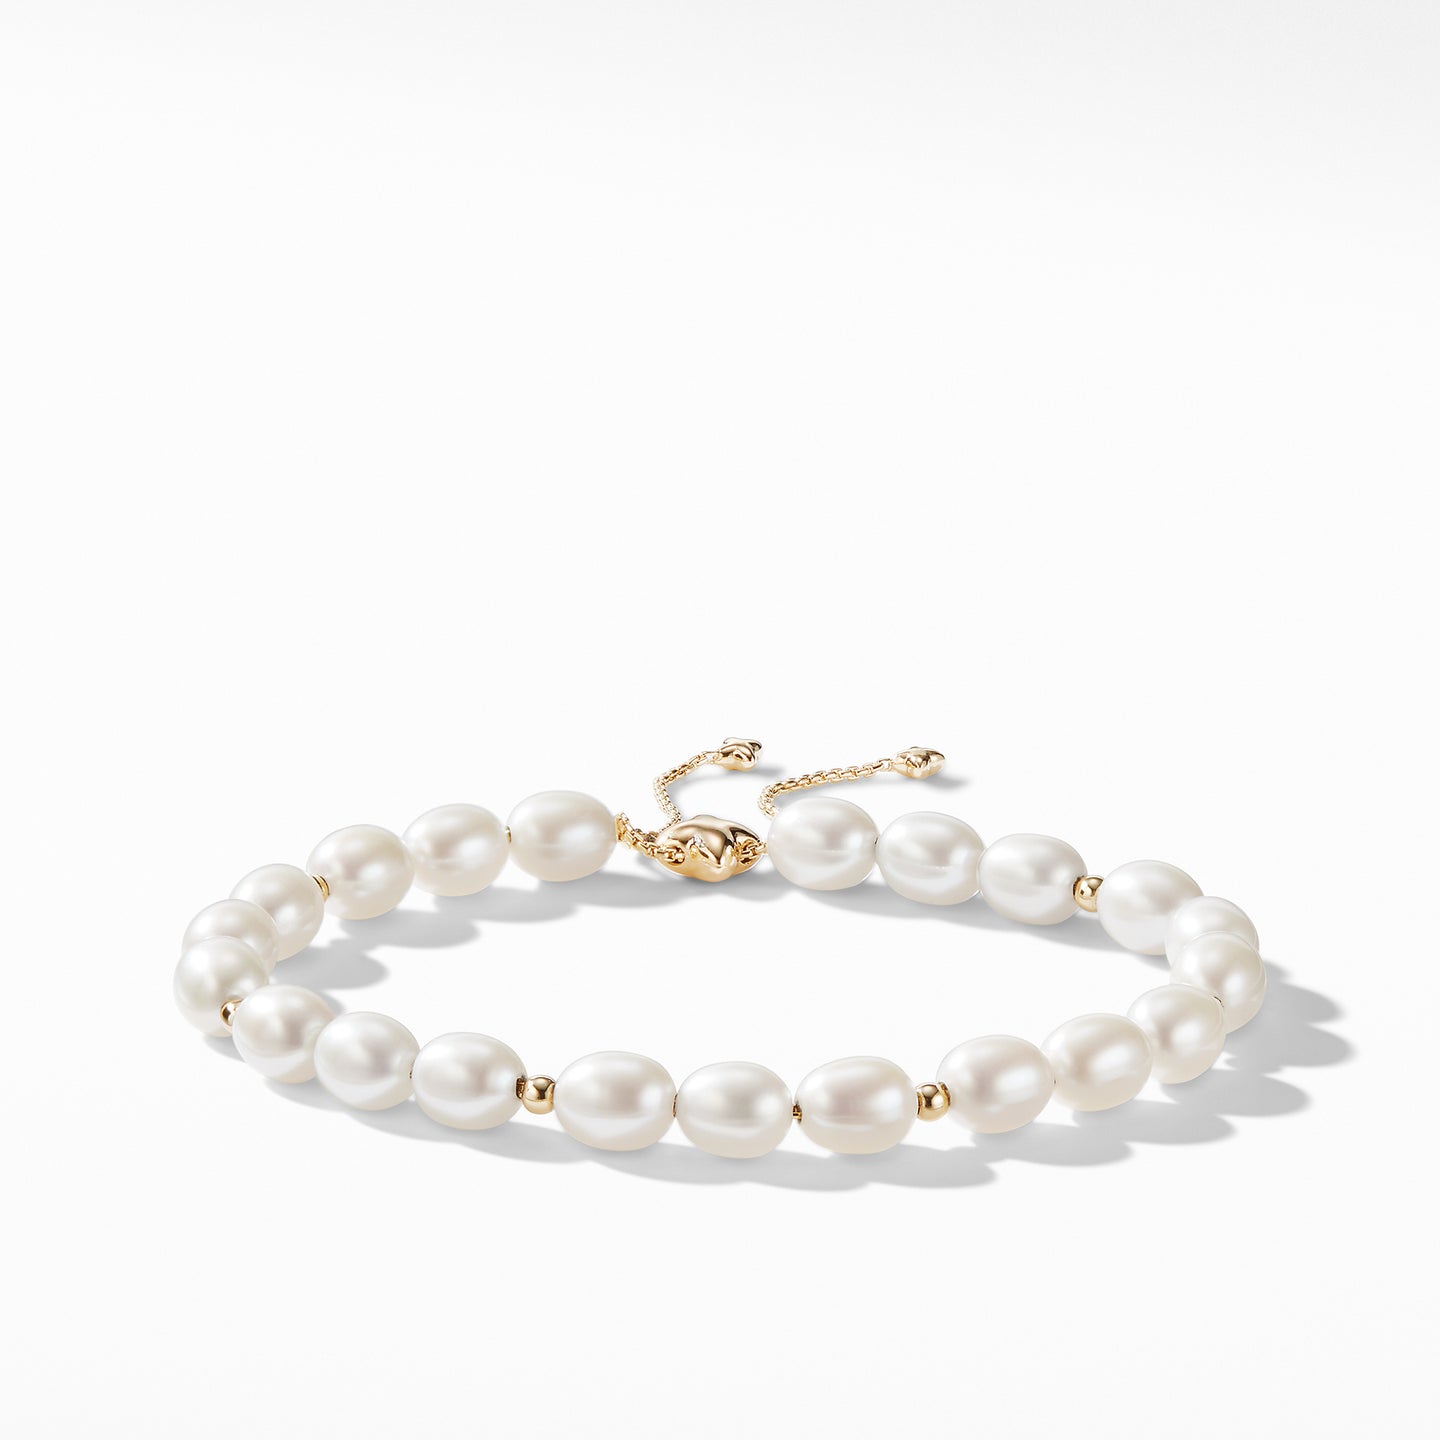 Spiritual Bead Bracelet with Pearls and 18K Gold